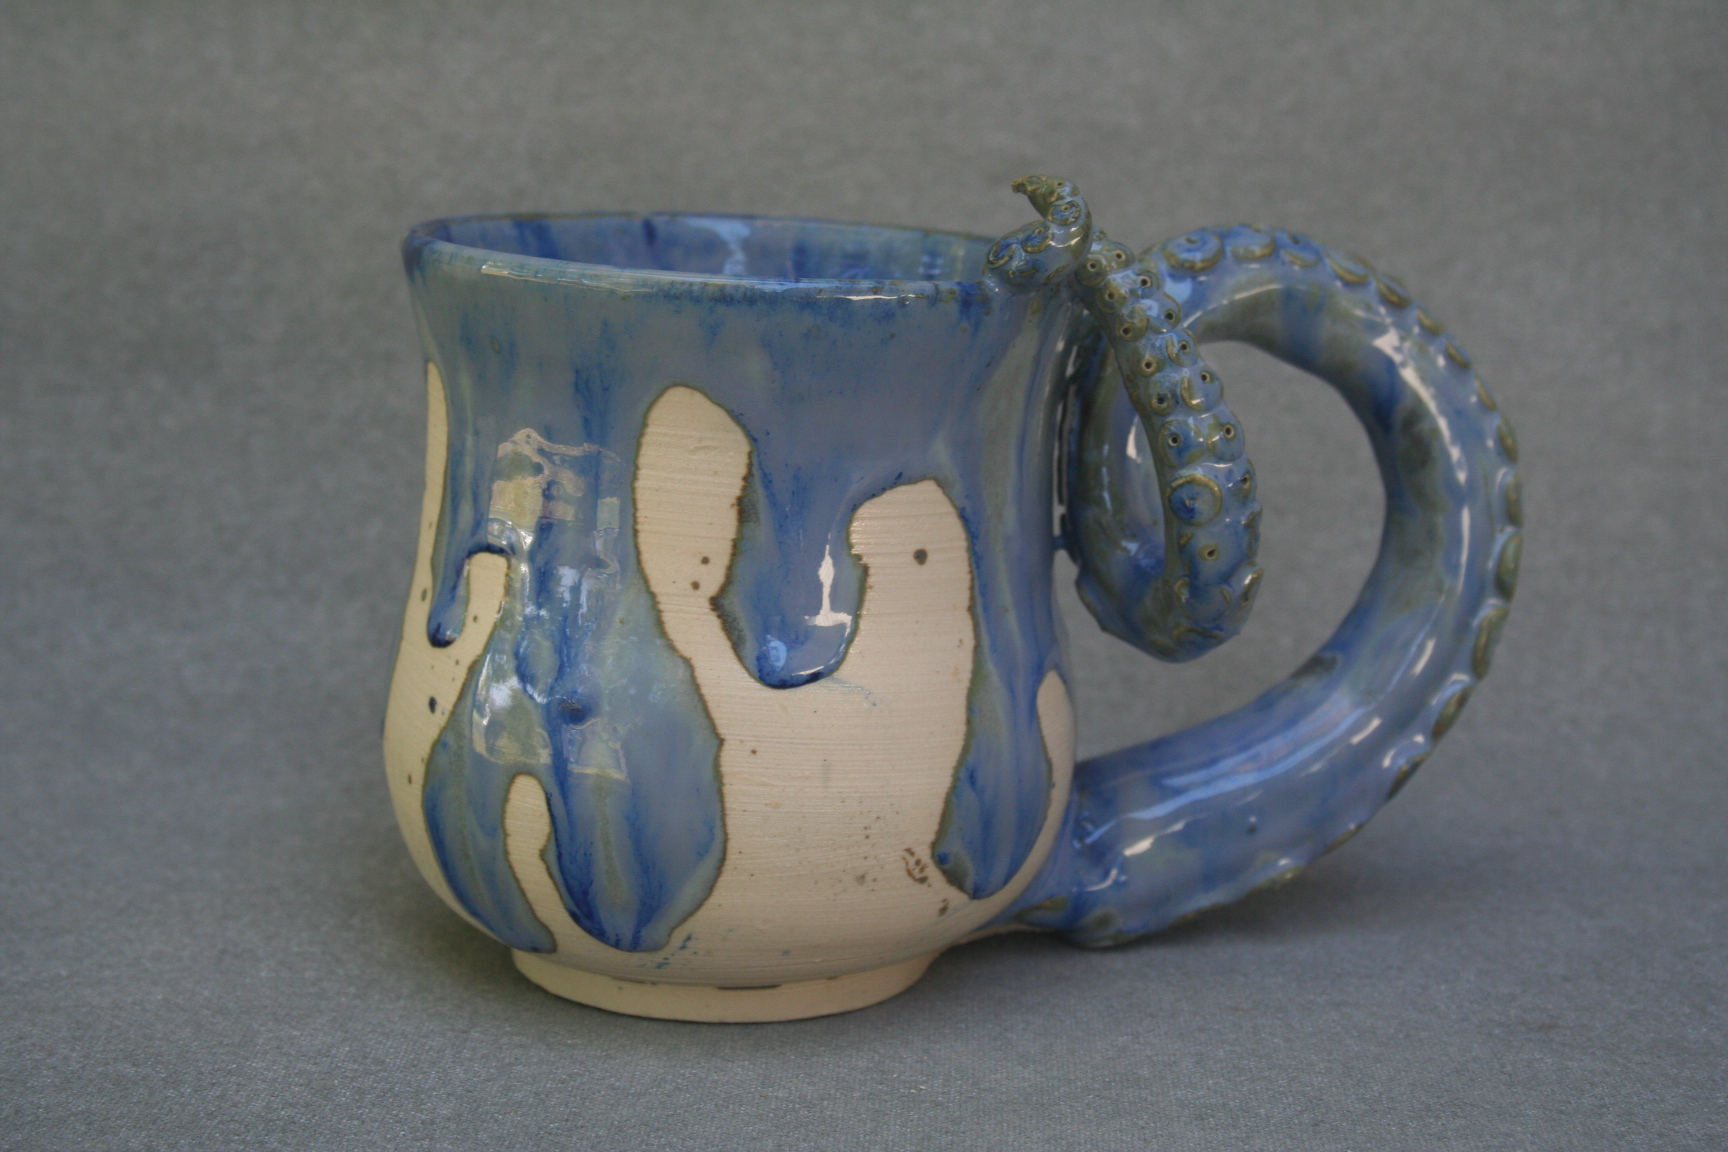 A photo of a handmade ceramic mug painted in white and blue, the handle of it resembling an octopus tentacle